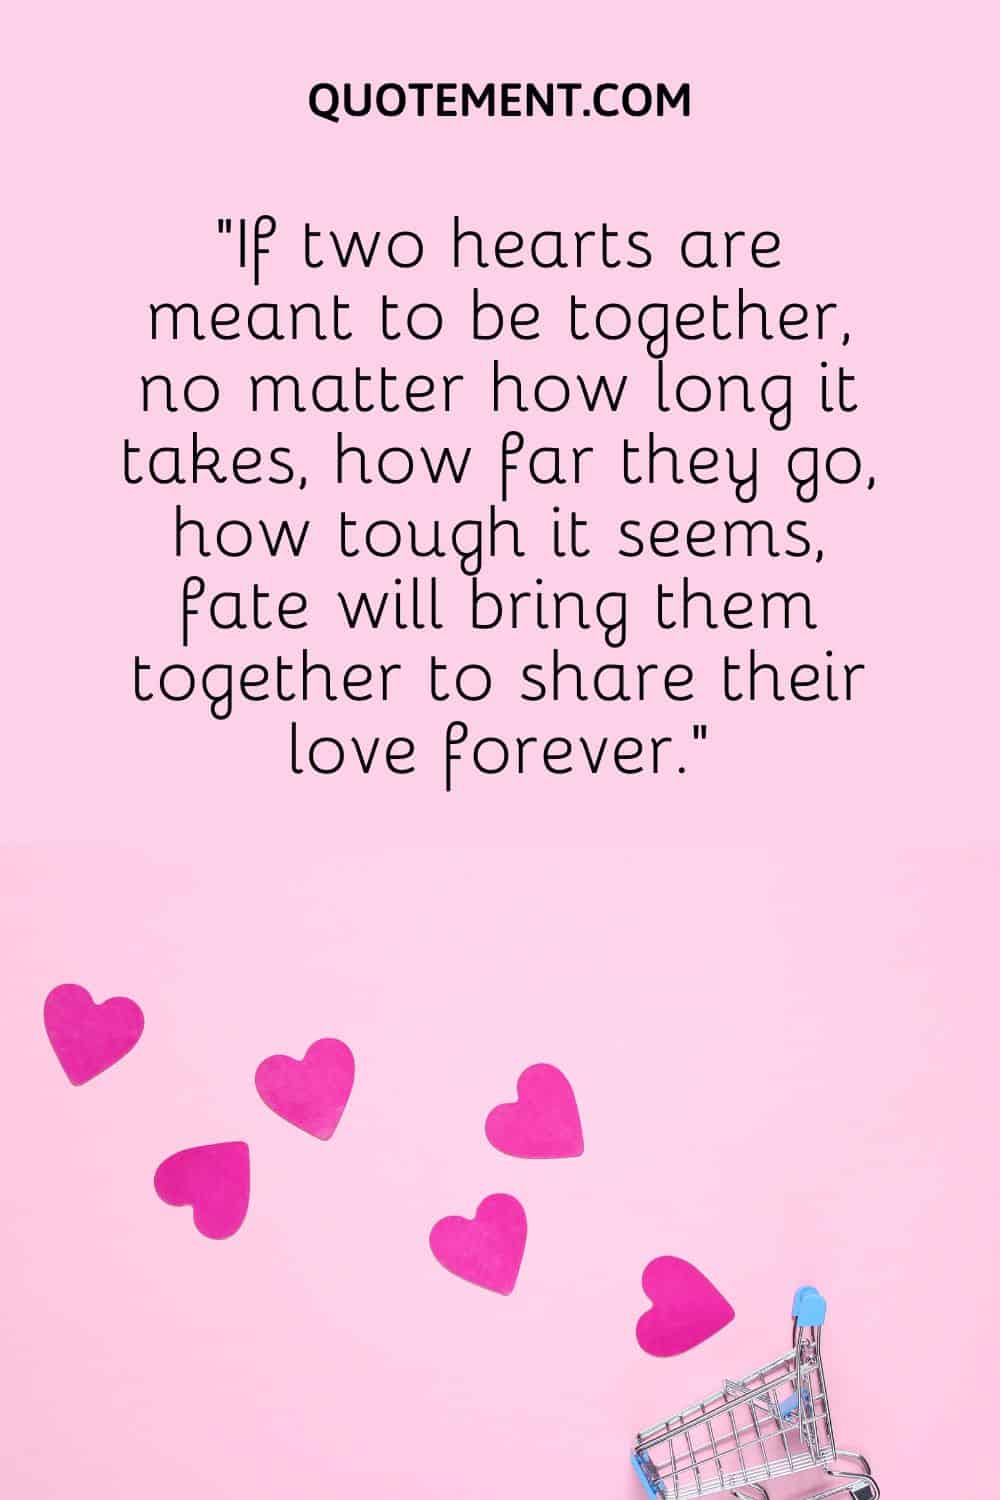 “If two hearts are meant to be together, no matter how long it takes, how far they go, how tough it seems, fate will bring them together to share their love forever.”